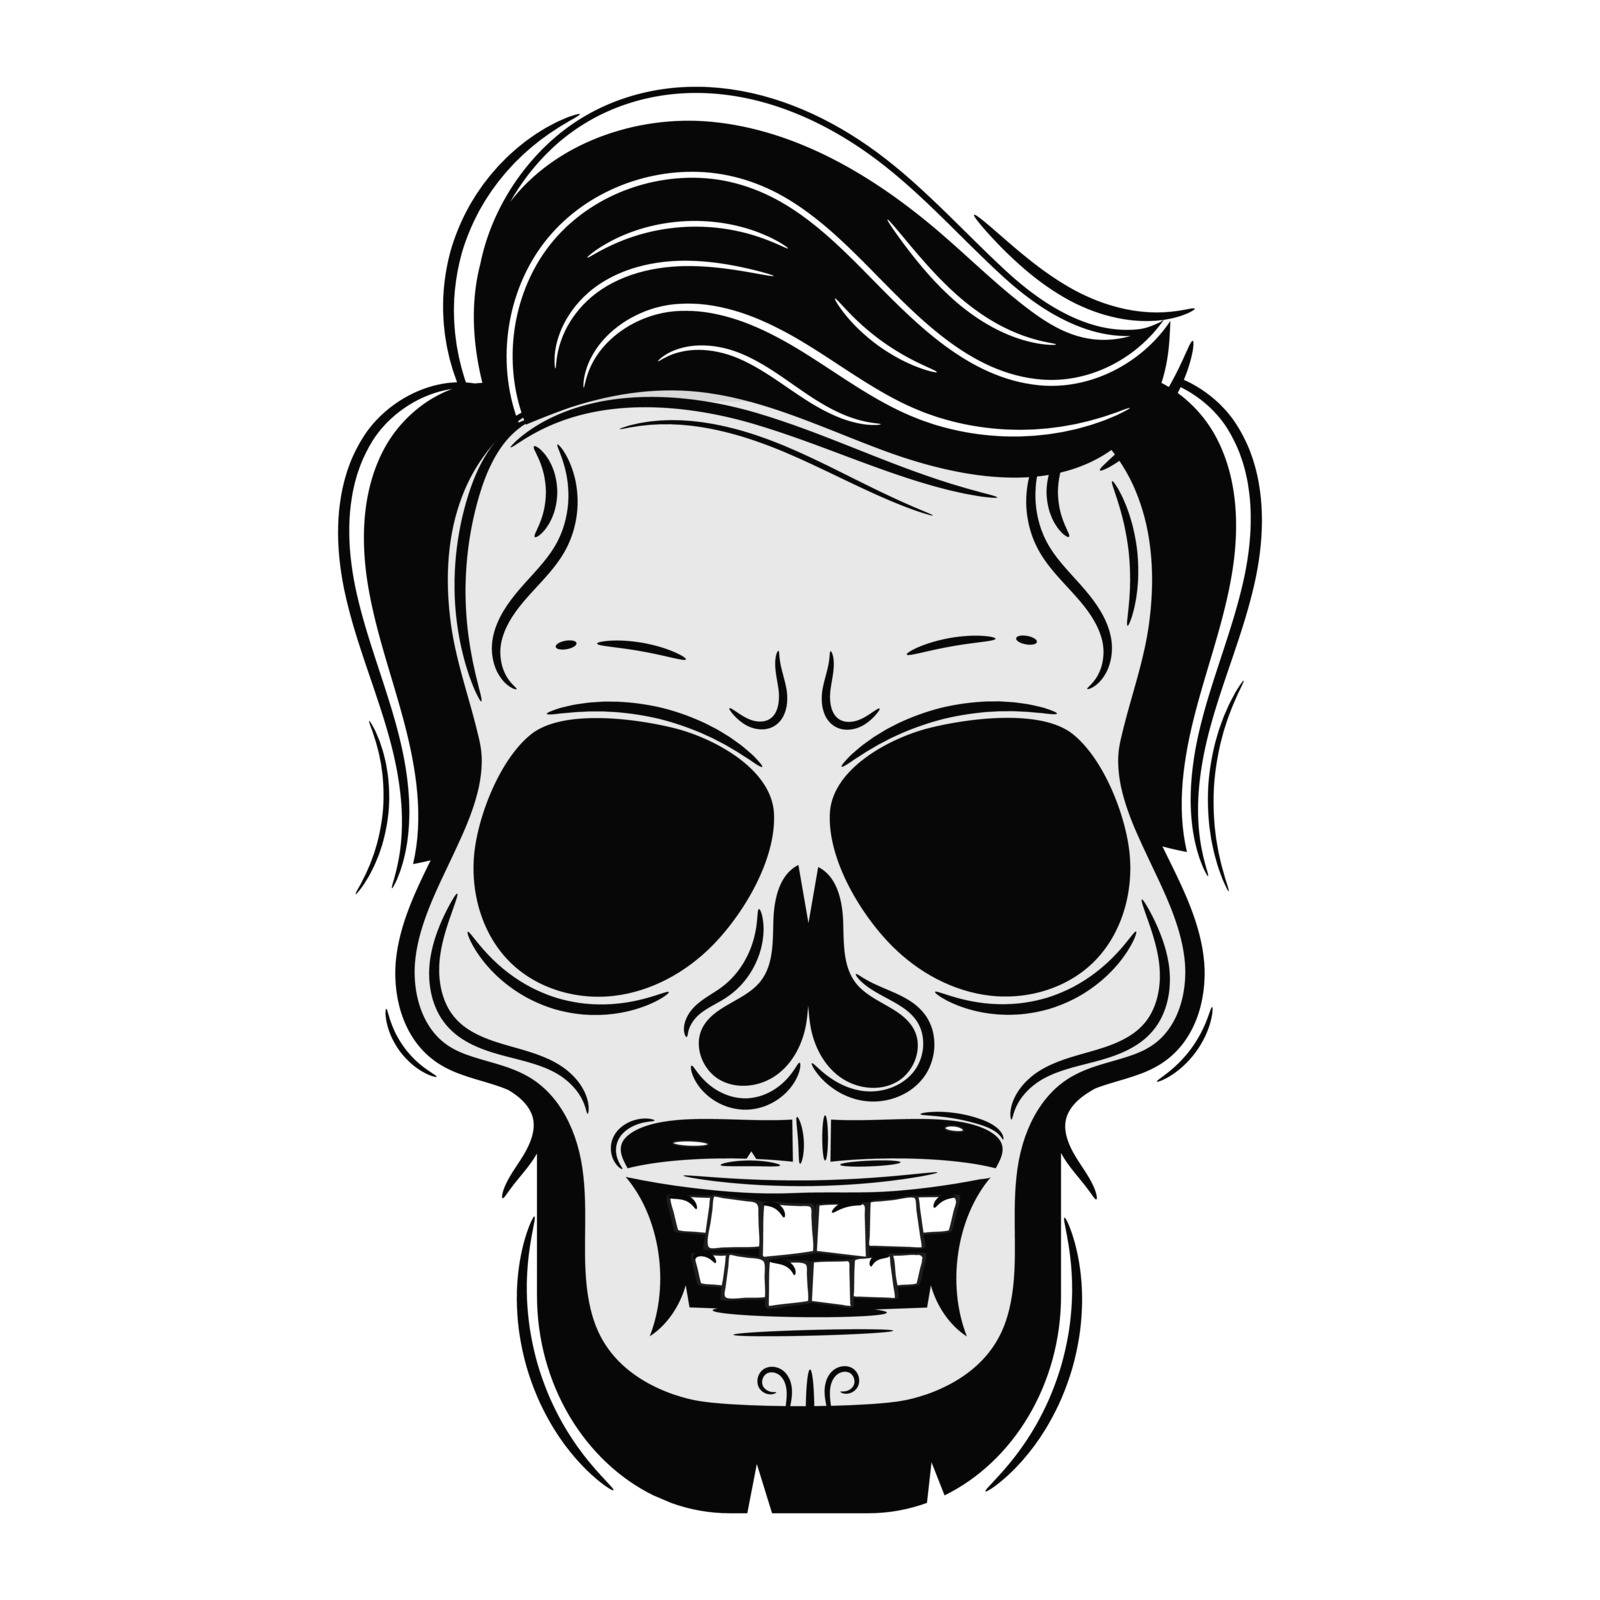 Beard Men Face with Skull Tattoo . Vector Illustration Suitable For Greeting Card, Poster Or T-shirt Printing.